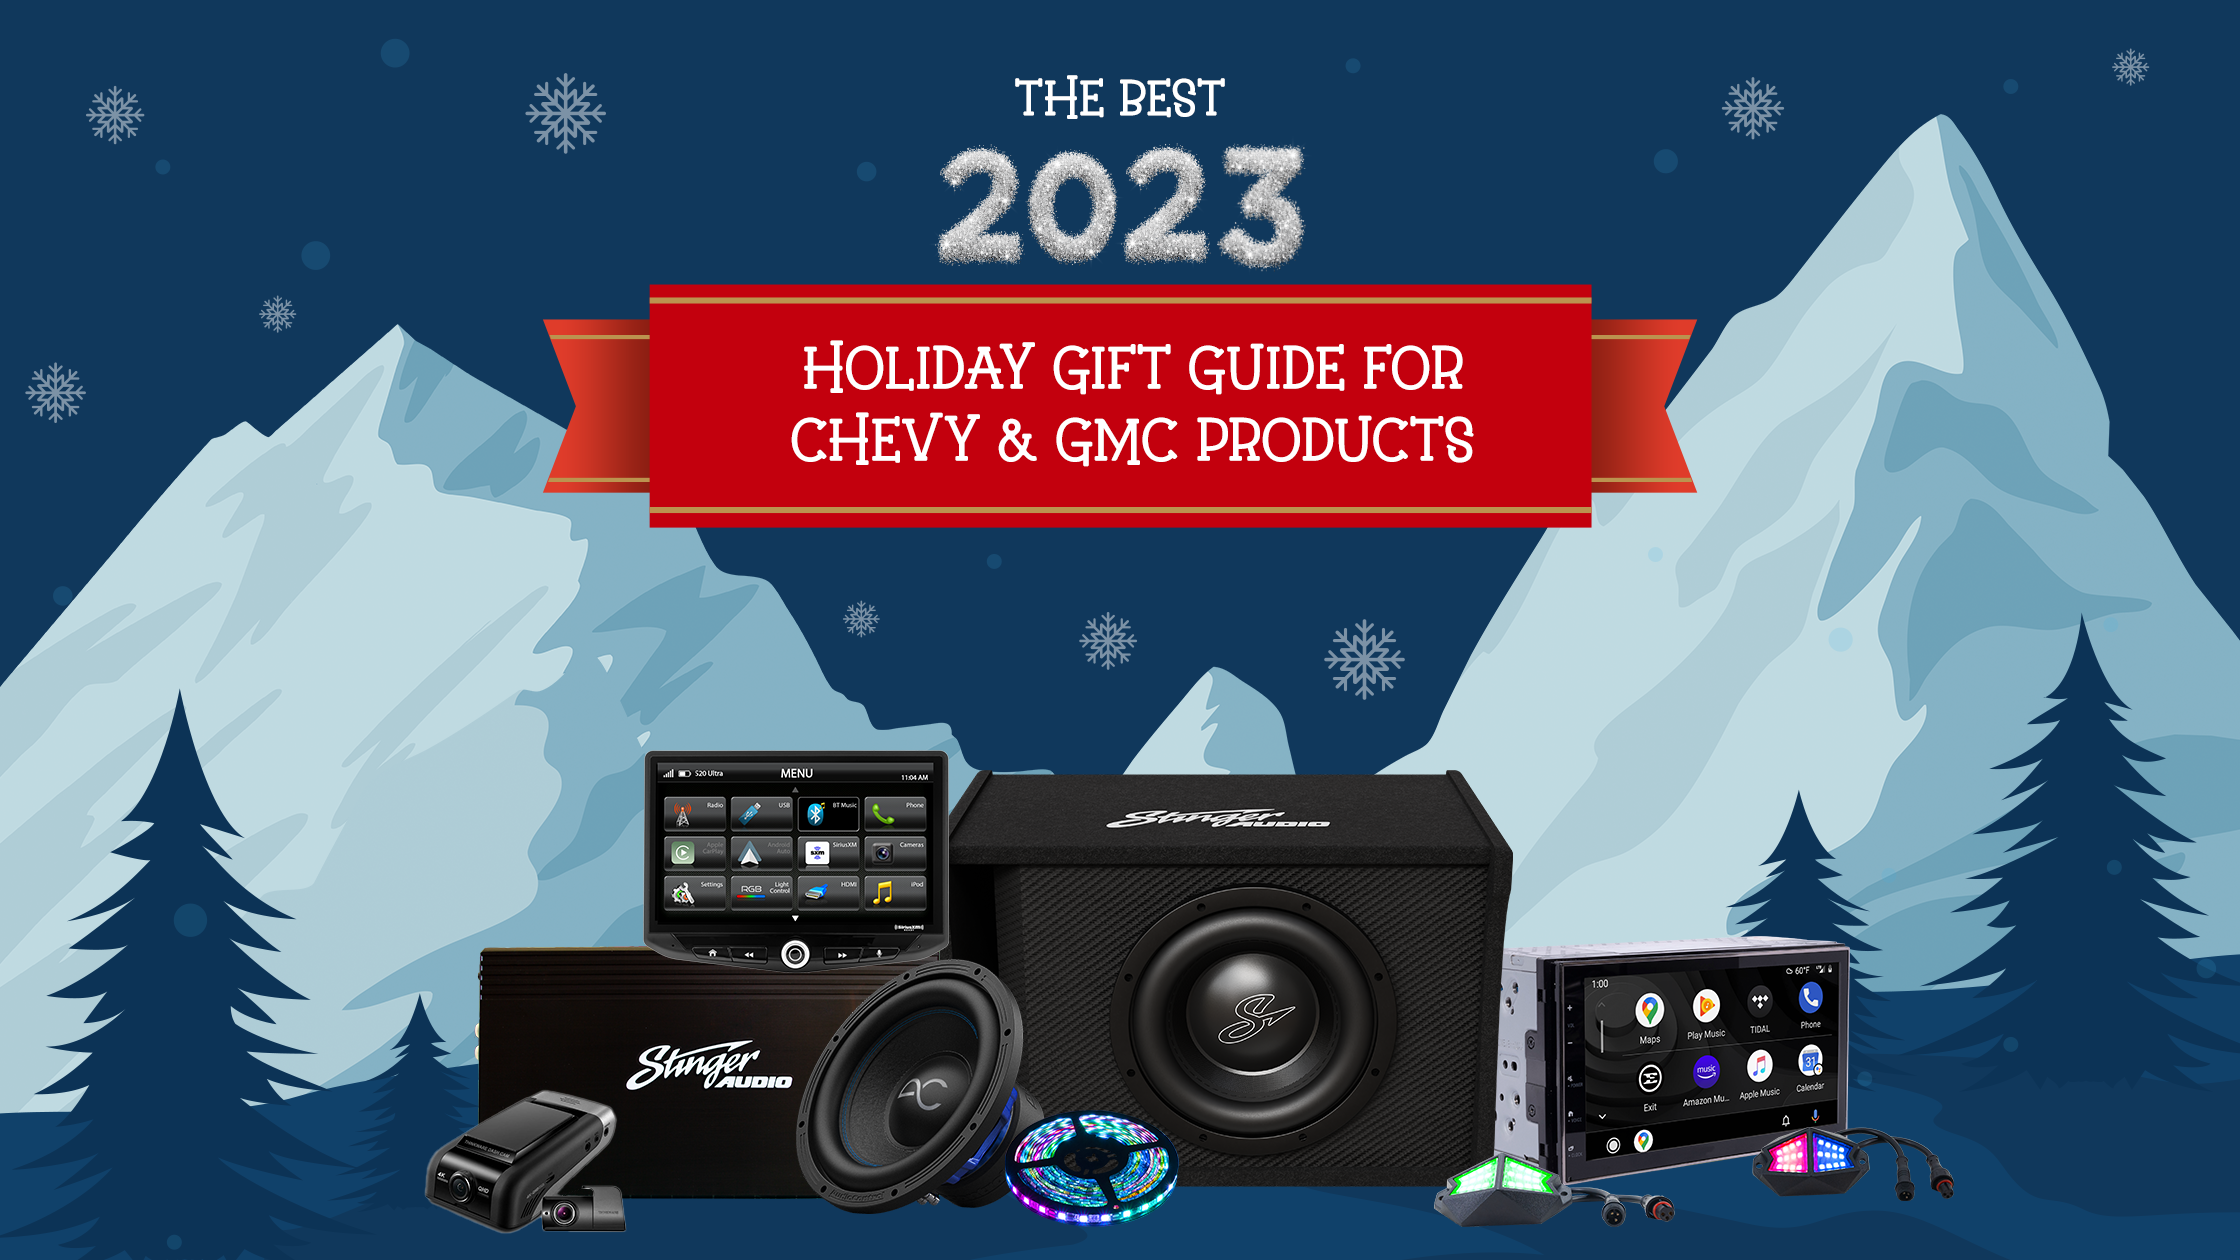 The Best 2023 Holiday Gift Guide for Chevy and GMC Trucks